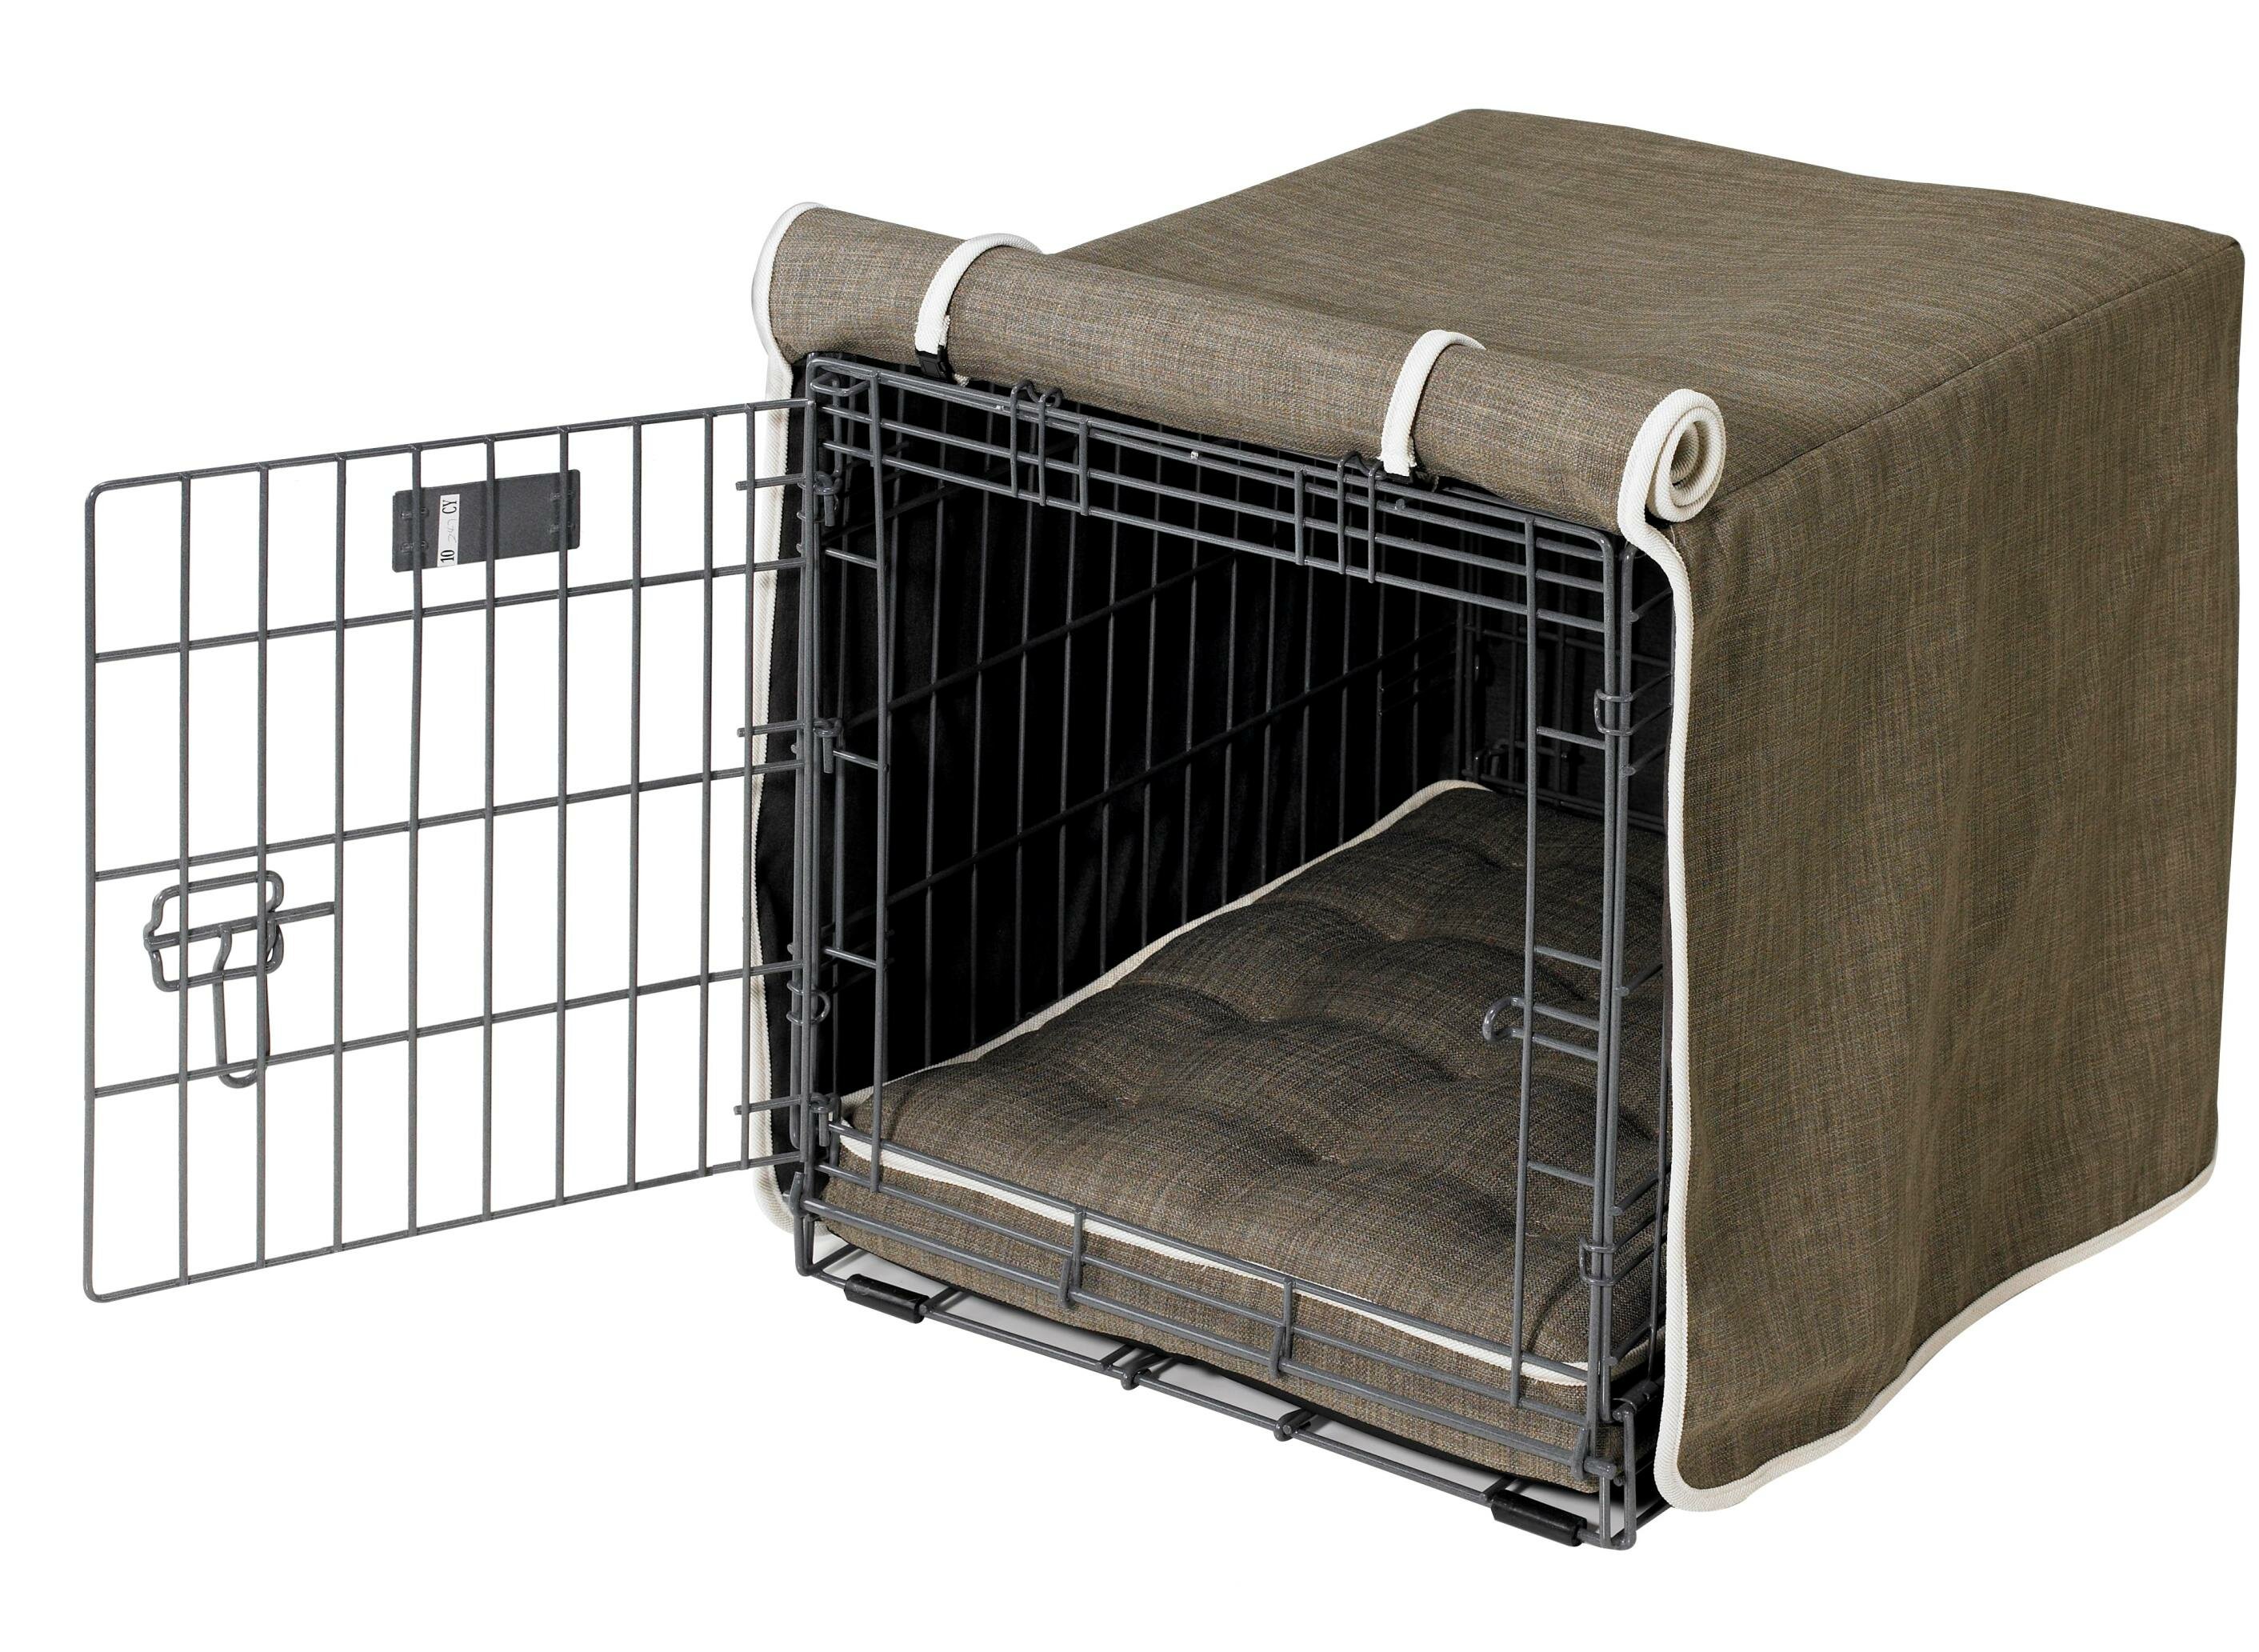 covering a dog's crate